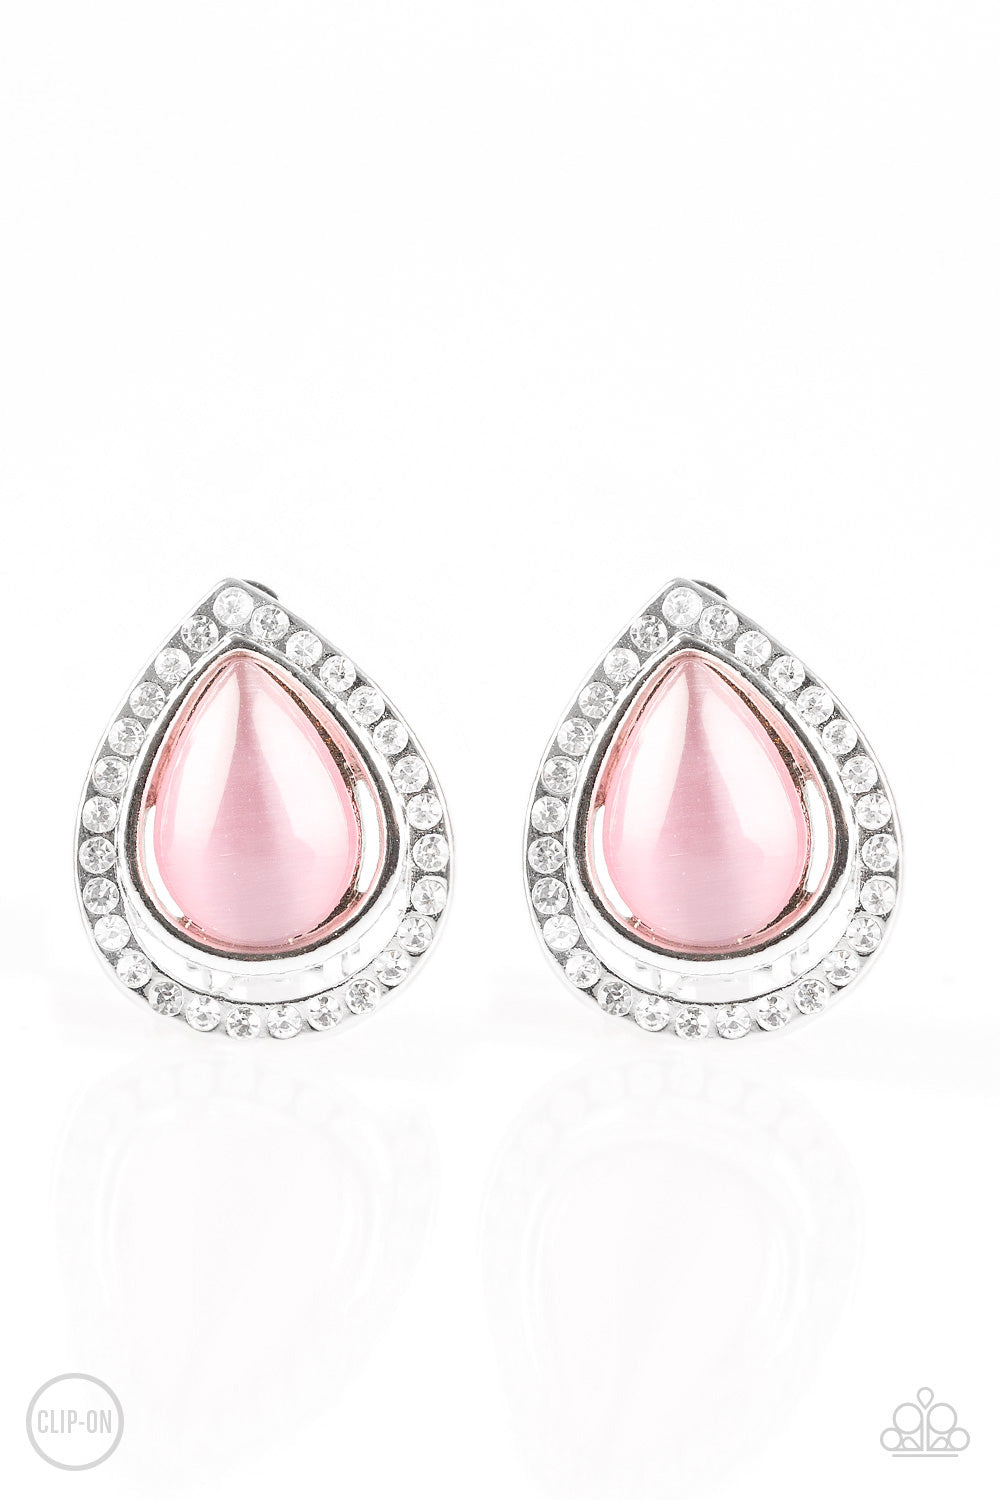 Noteworthy Shimmer - pink - CLIP ON - Paparazzi earrings